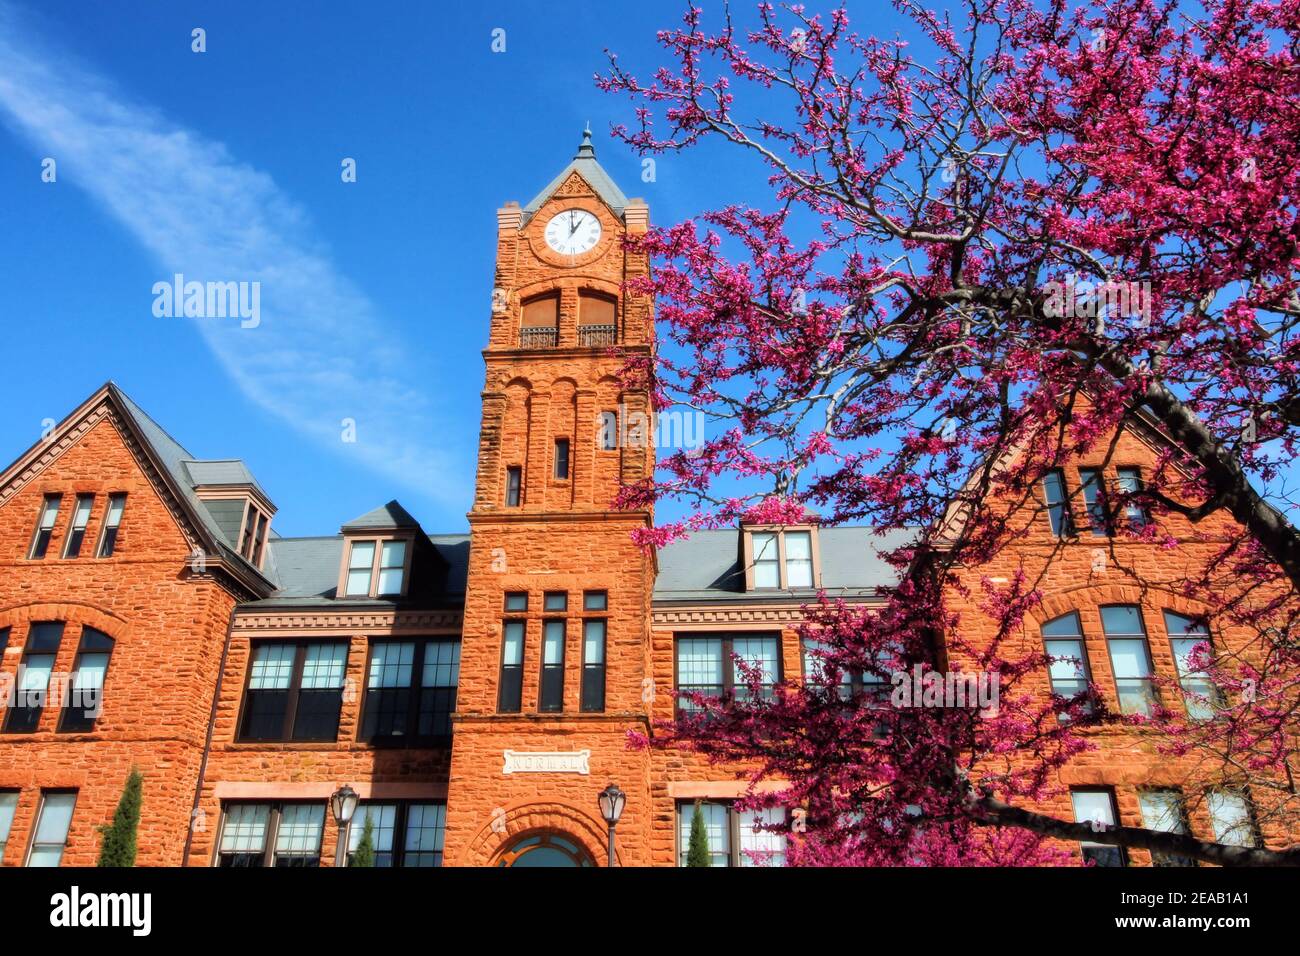 Historic Old North Tower in Edmond Oklahoma stands against a blue sky with a spring blooming Redbud tree in front. Stock Photo